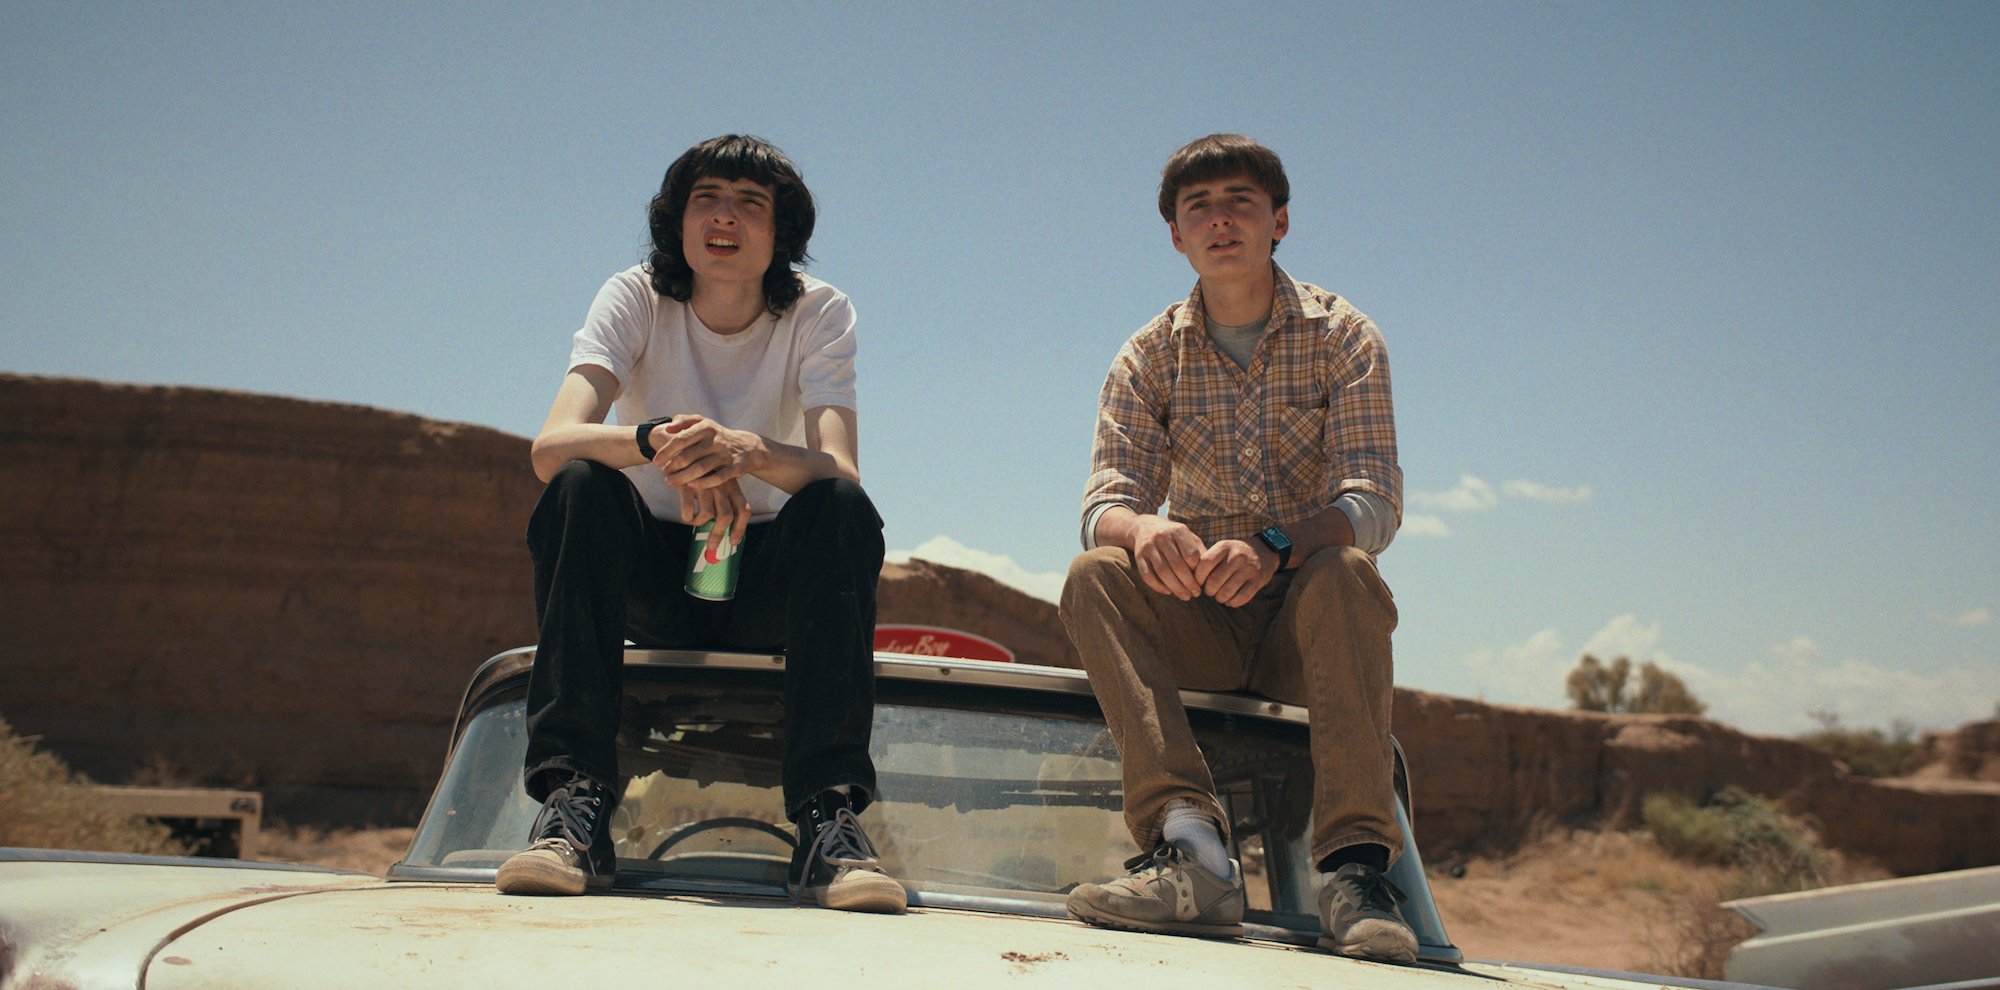 The Duffer Brothers forgot 'Stranger Things 4' character Will Byers' birthday in season 4. Noah Schnapp and Finn Wolfhard sit on top of a car in a production still.